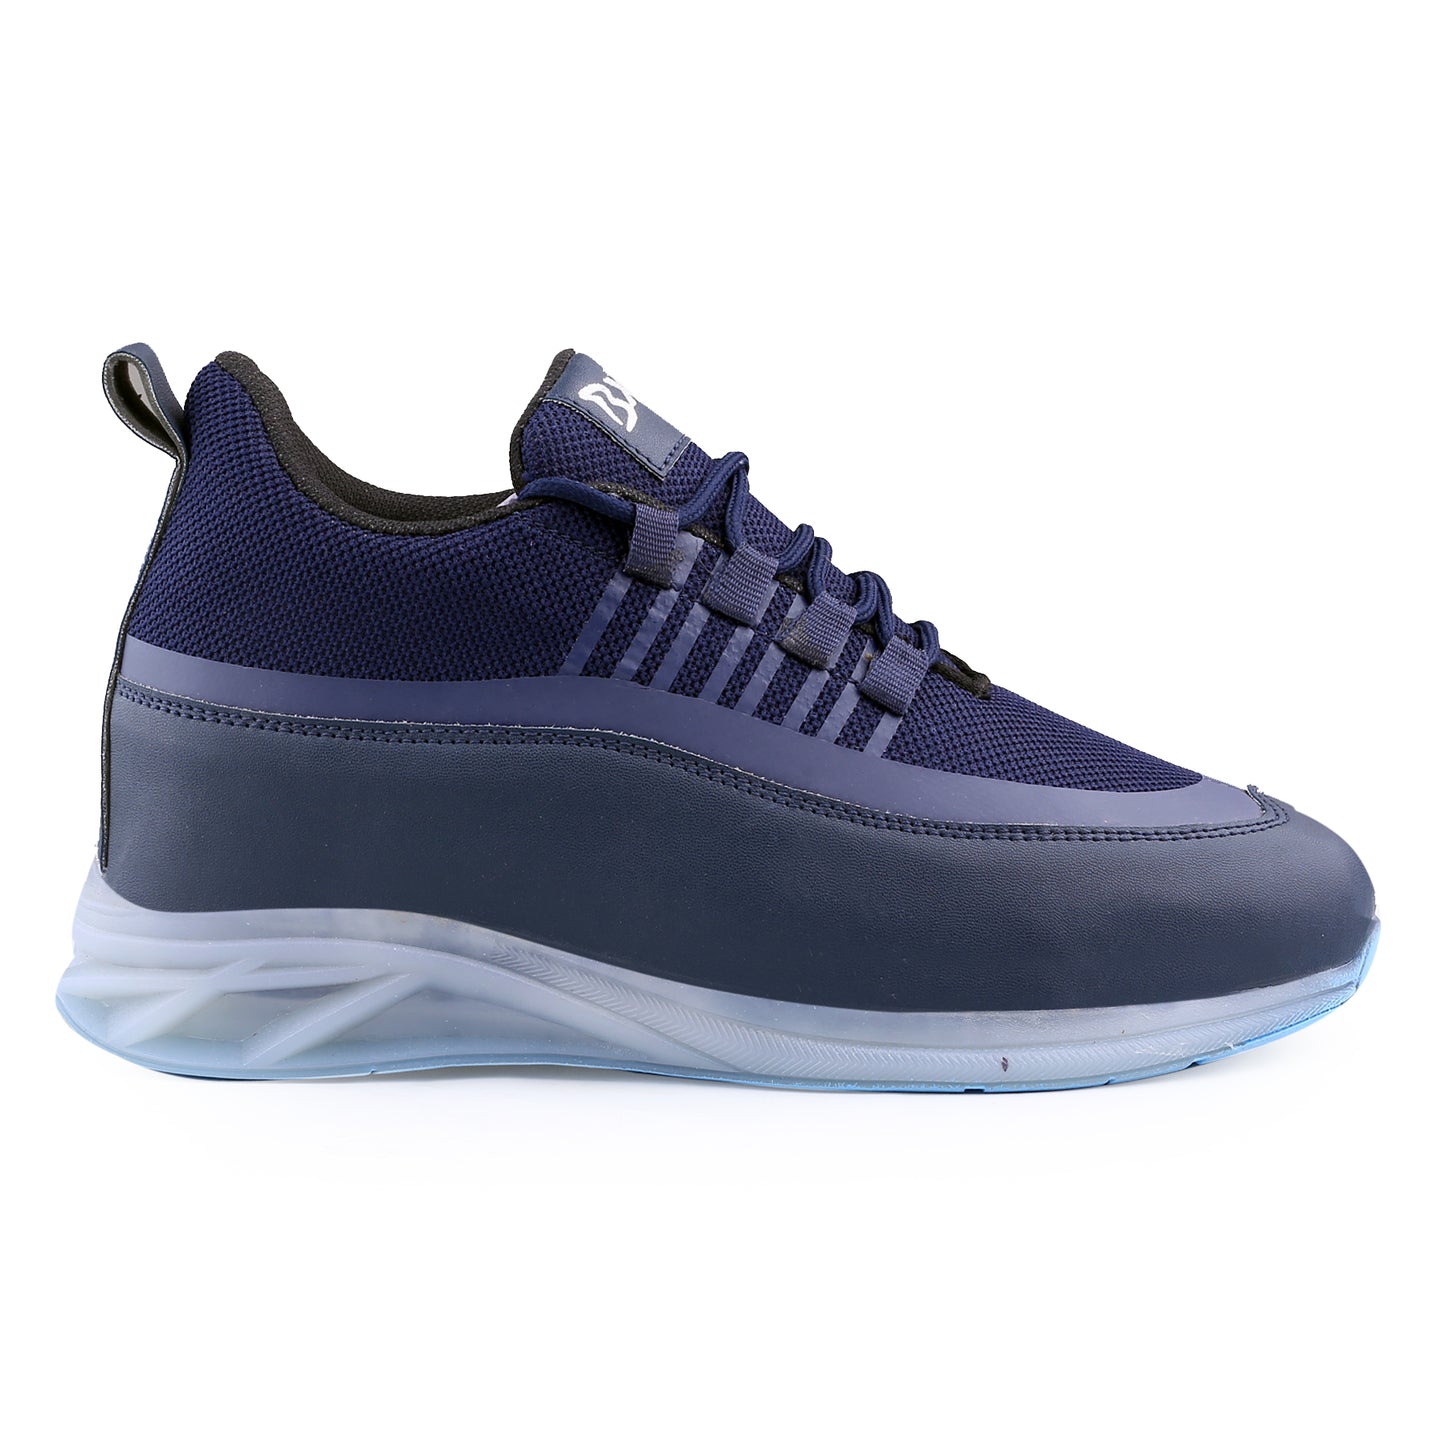 BXXY Men's 3 Inch Hidden Height Increasing Casual Sports Lace-Up Shoes with Airmix Sole.